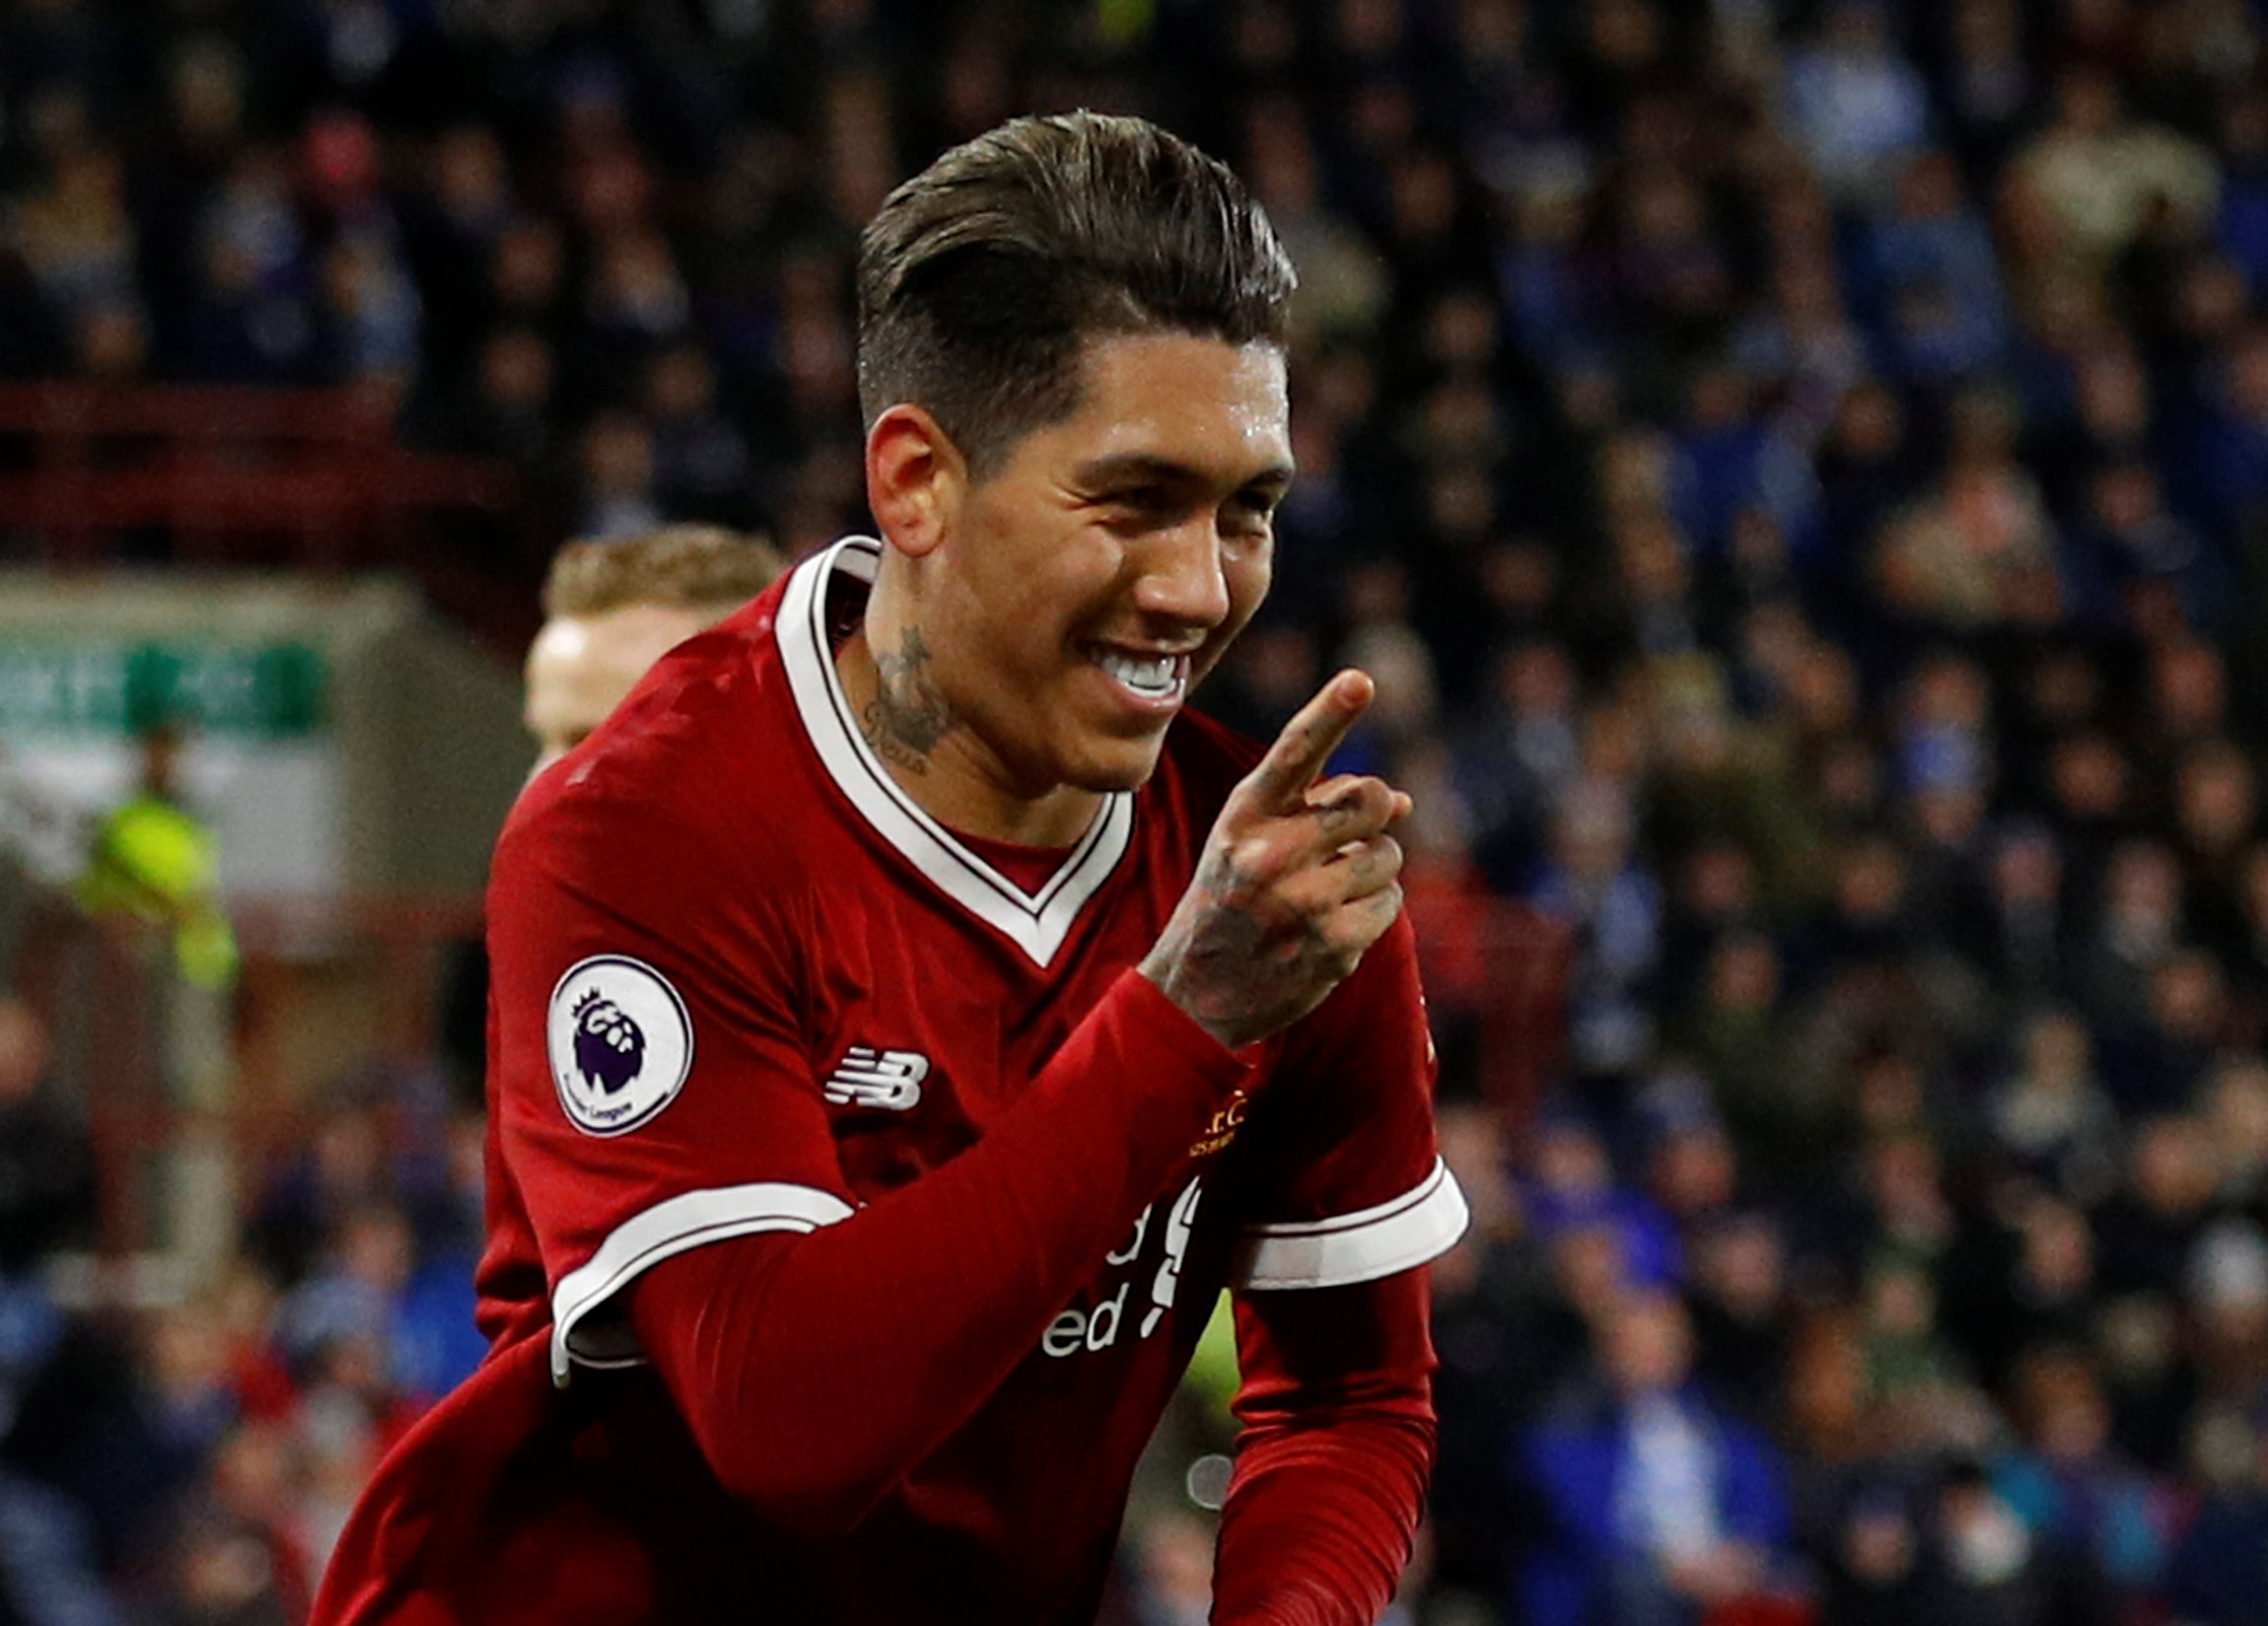 Liverpool not on revenge mission against Spurs: Firmino